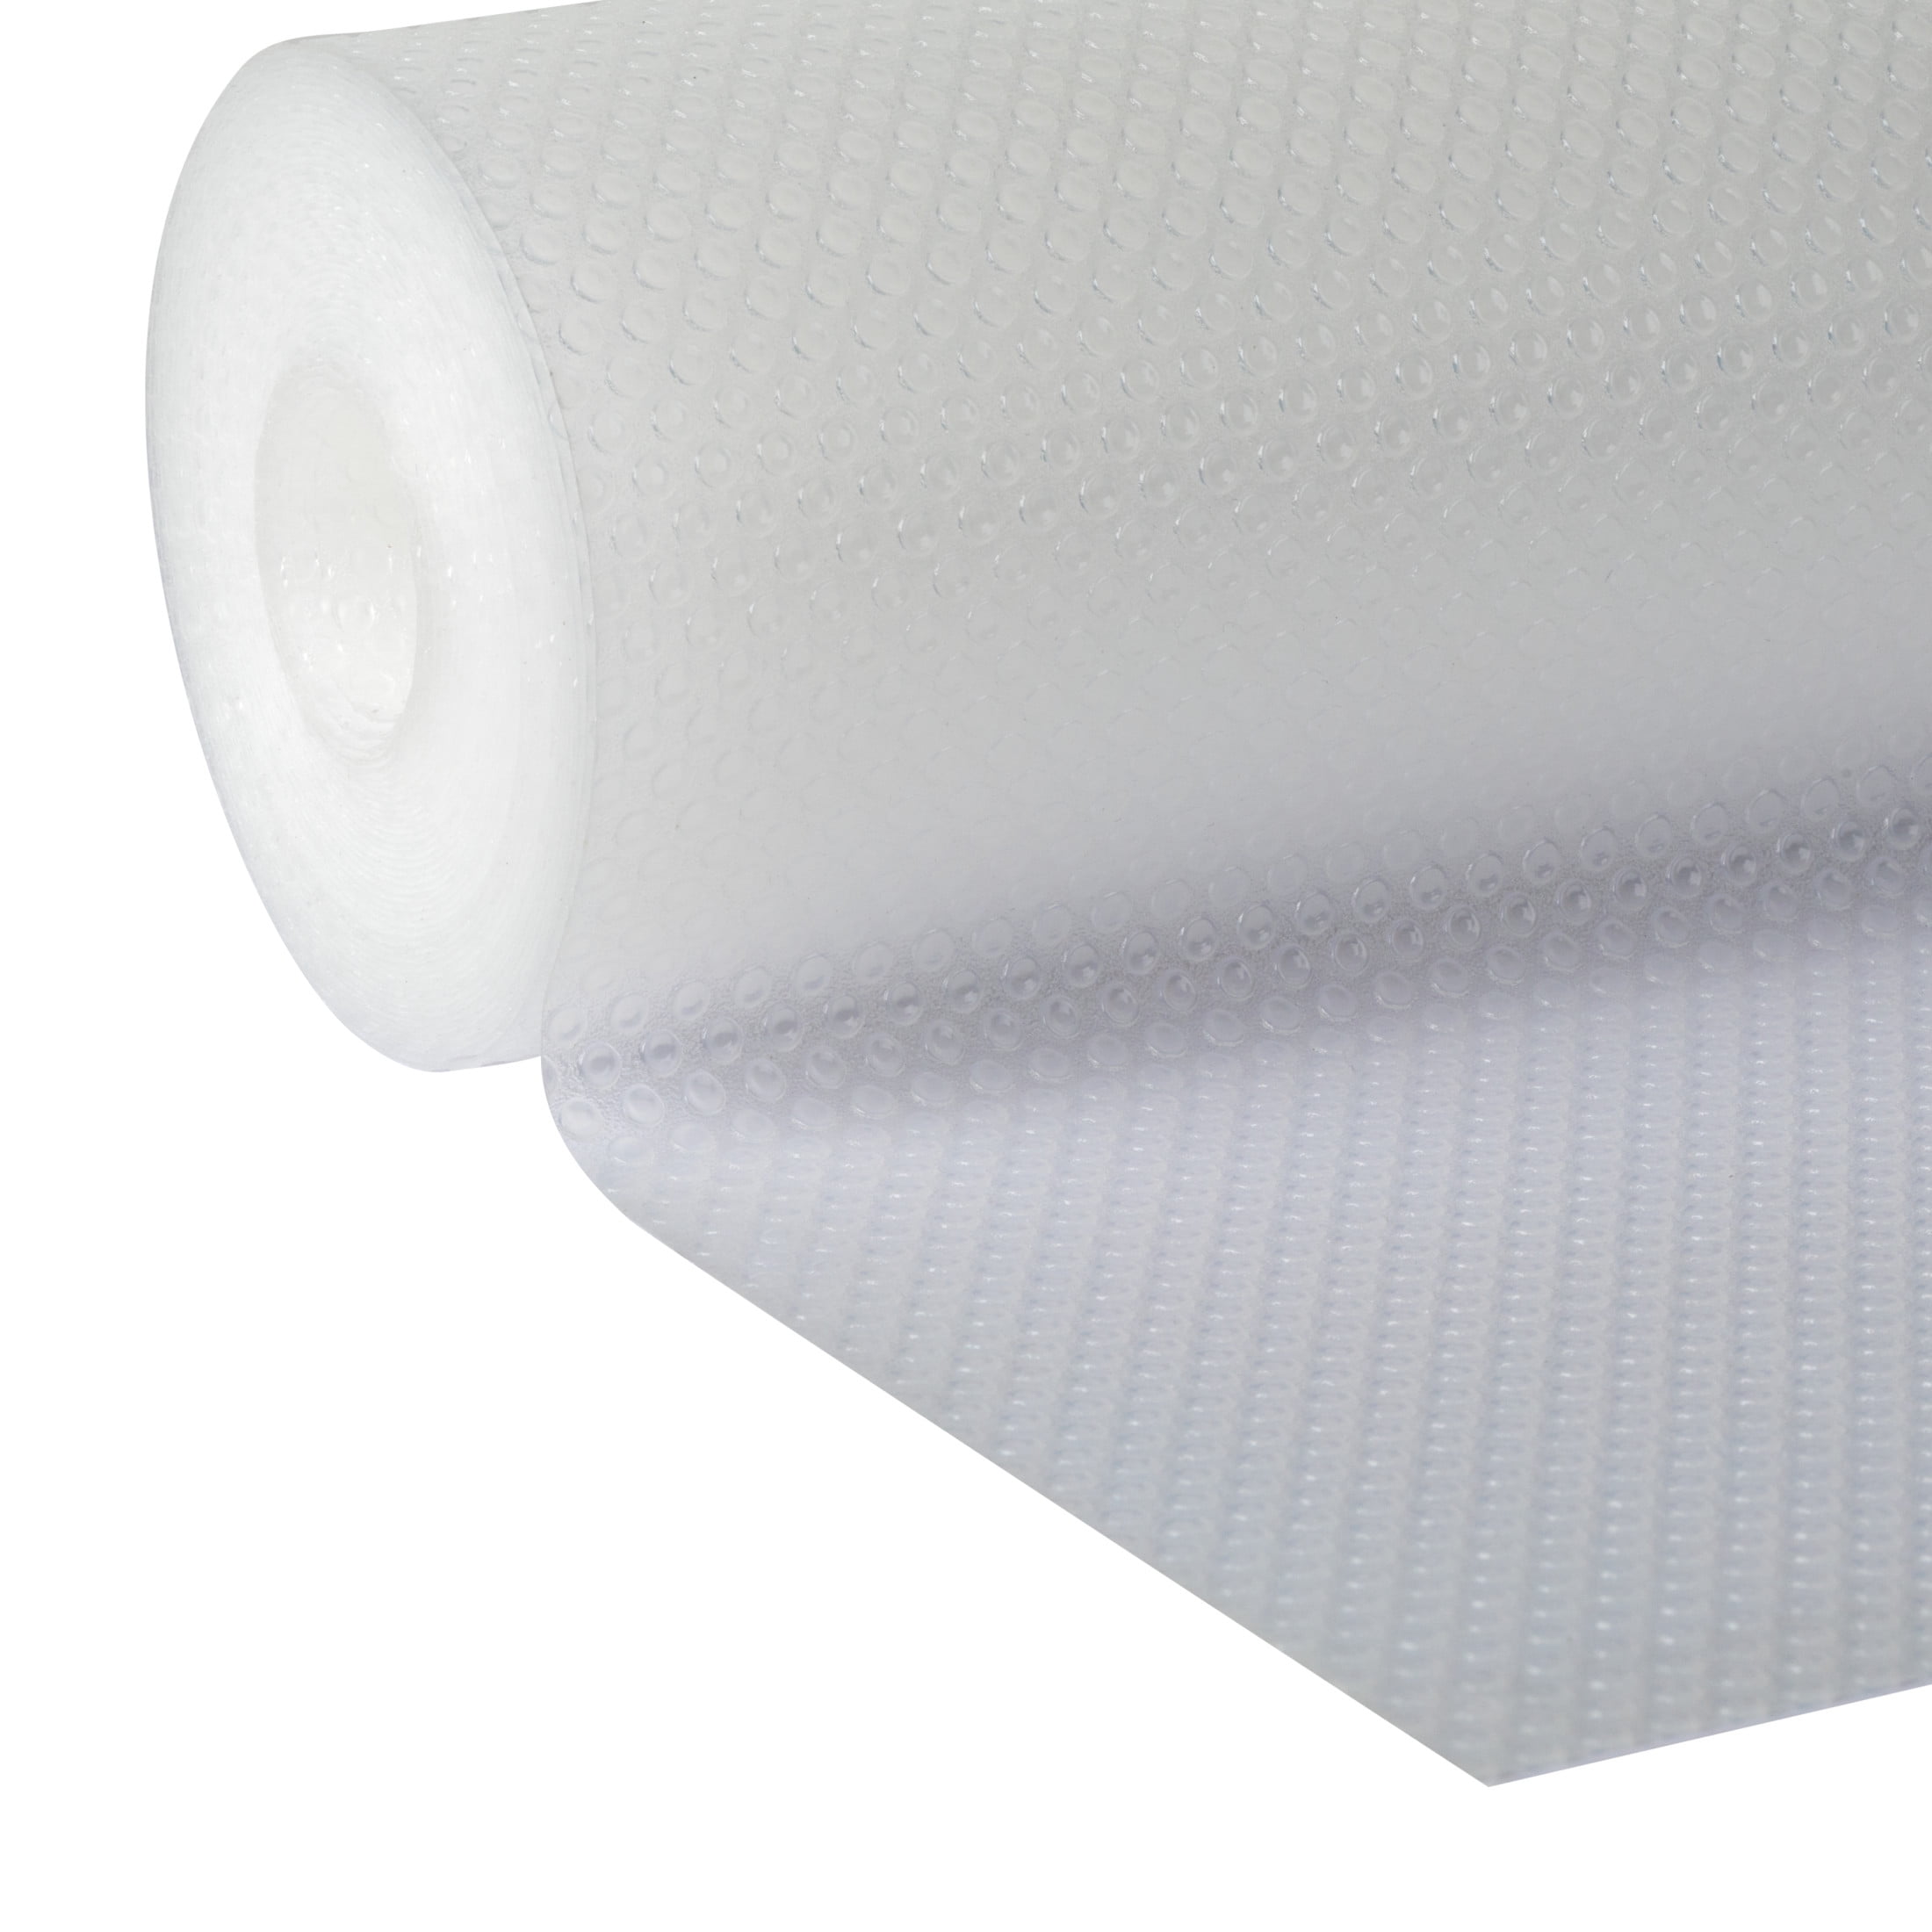 EasyLiner Clear Classic Shelf Liner, Clear, 18 in. x 30 ft. Roll